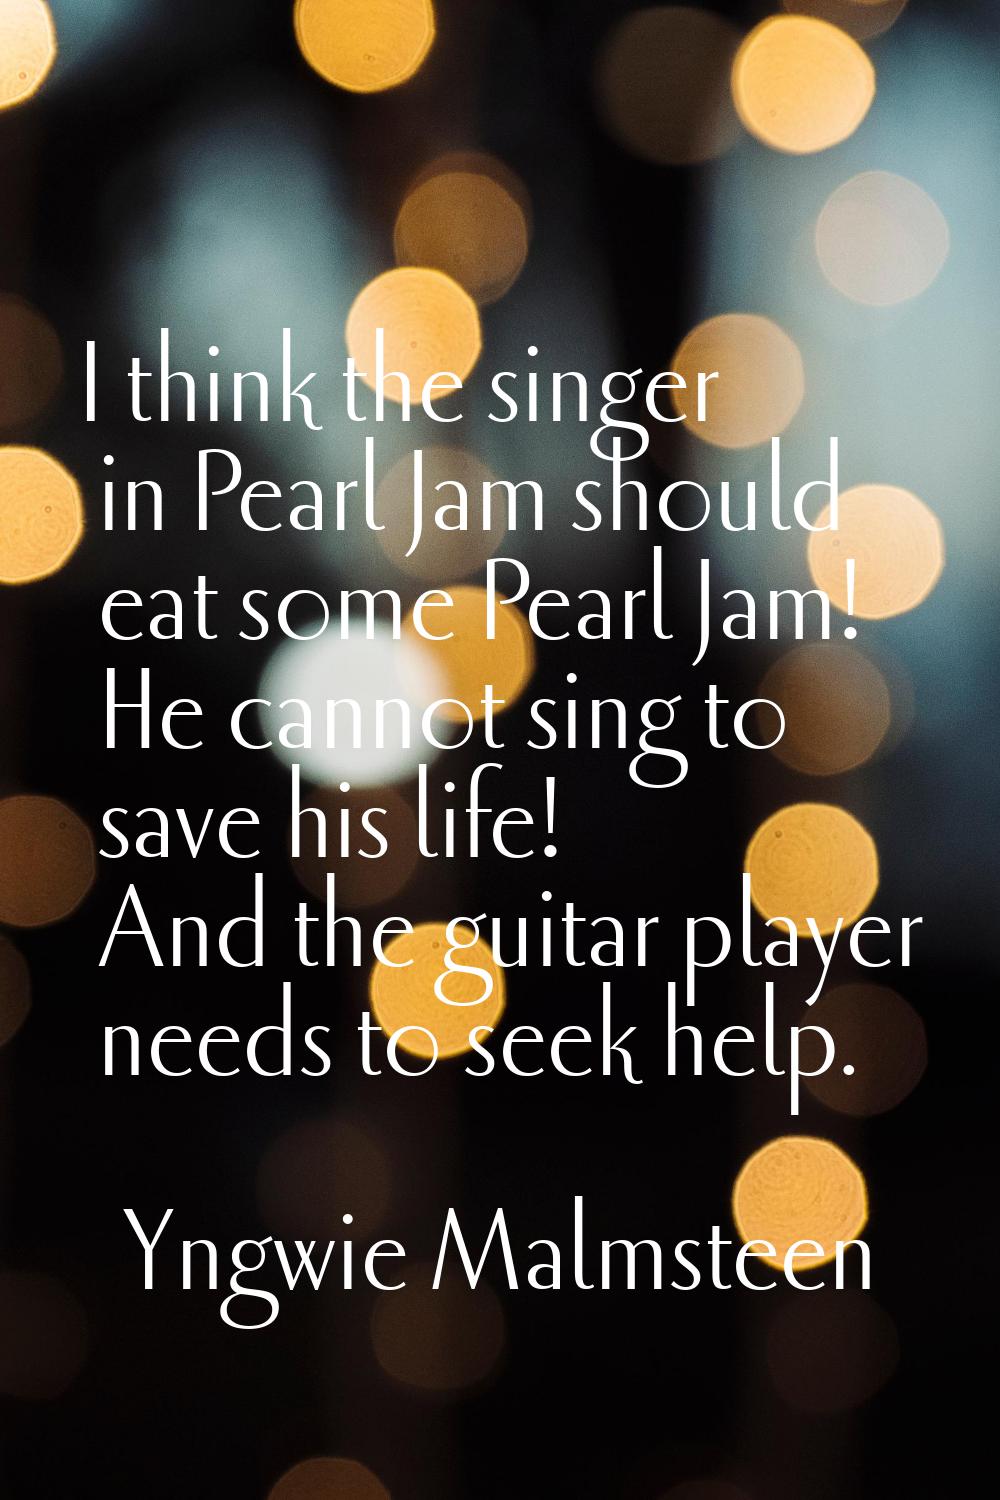 I think the singer in Pearl Jam should eat some Pearl Jam! He cannot sing to save his life! And the